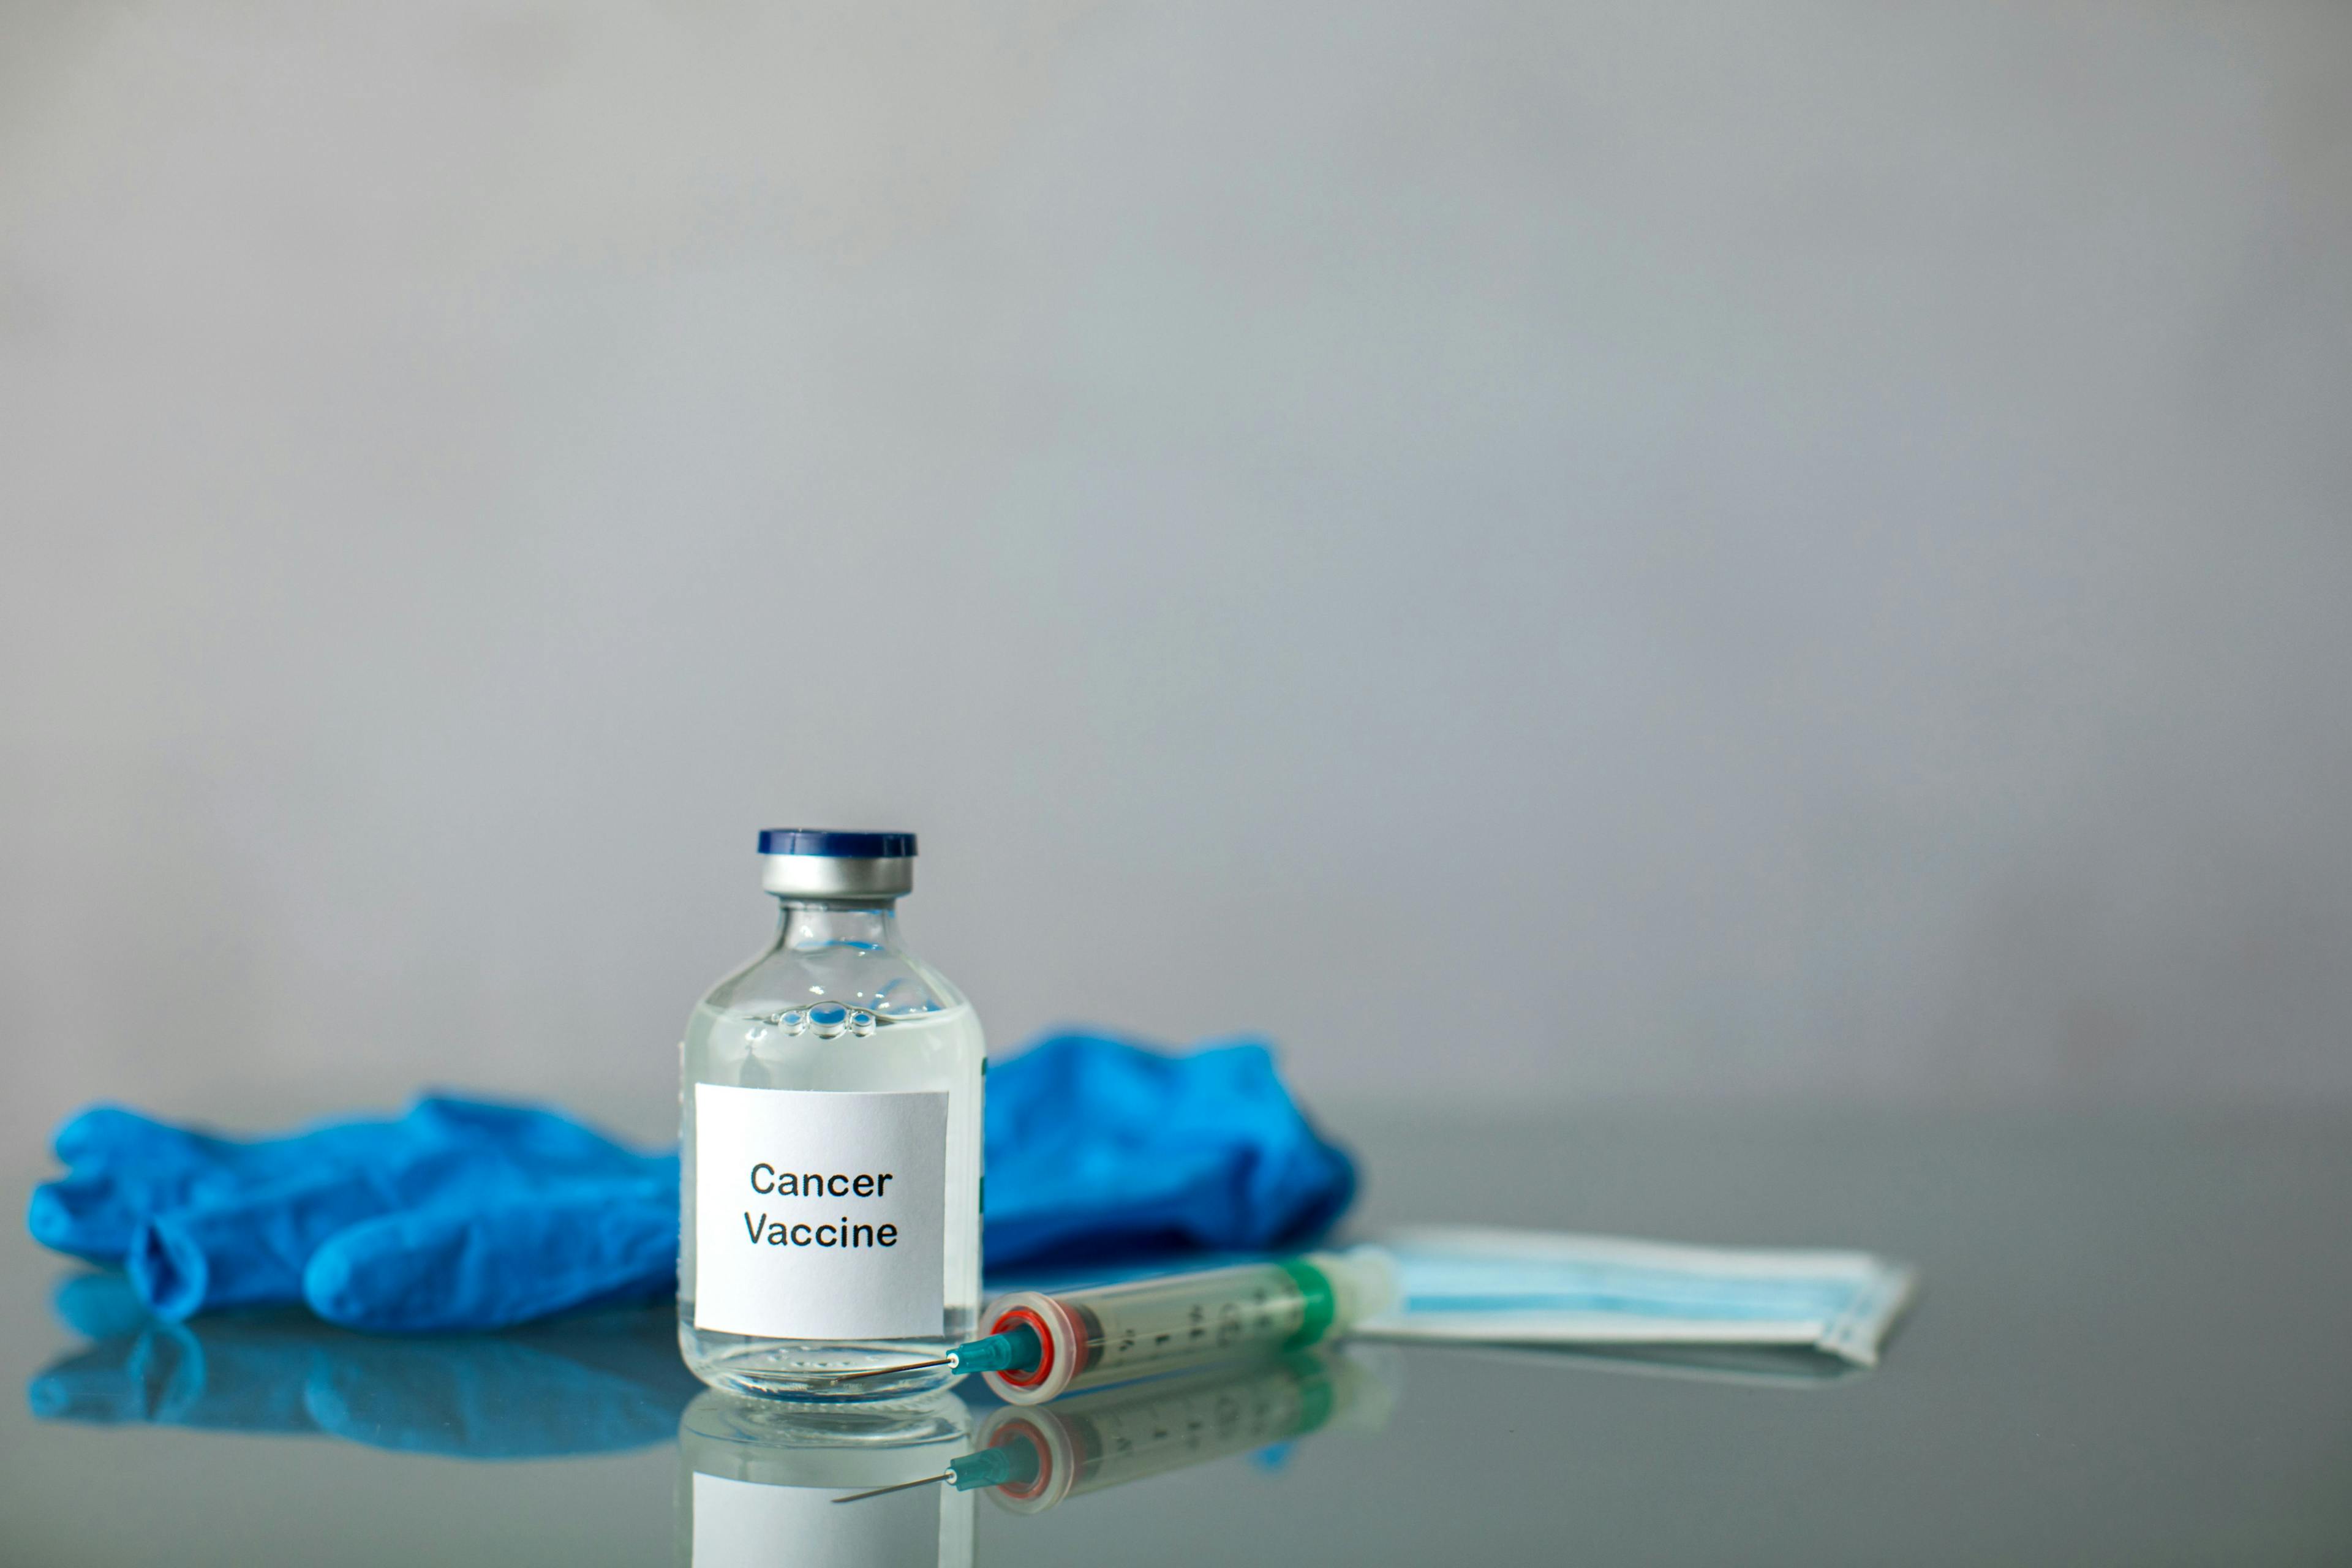 Image of a cancer vaccine vial with a syringe and a blue rubber glove in the background.